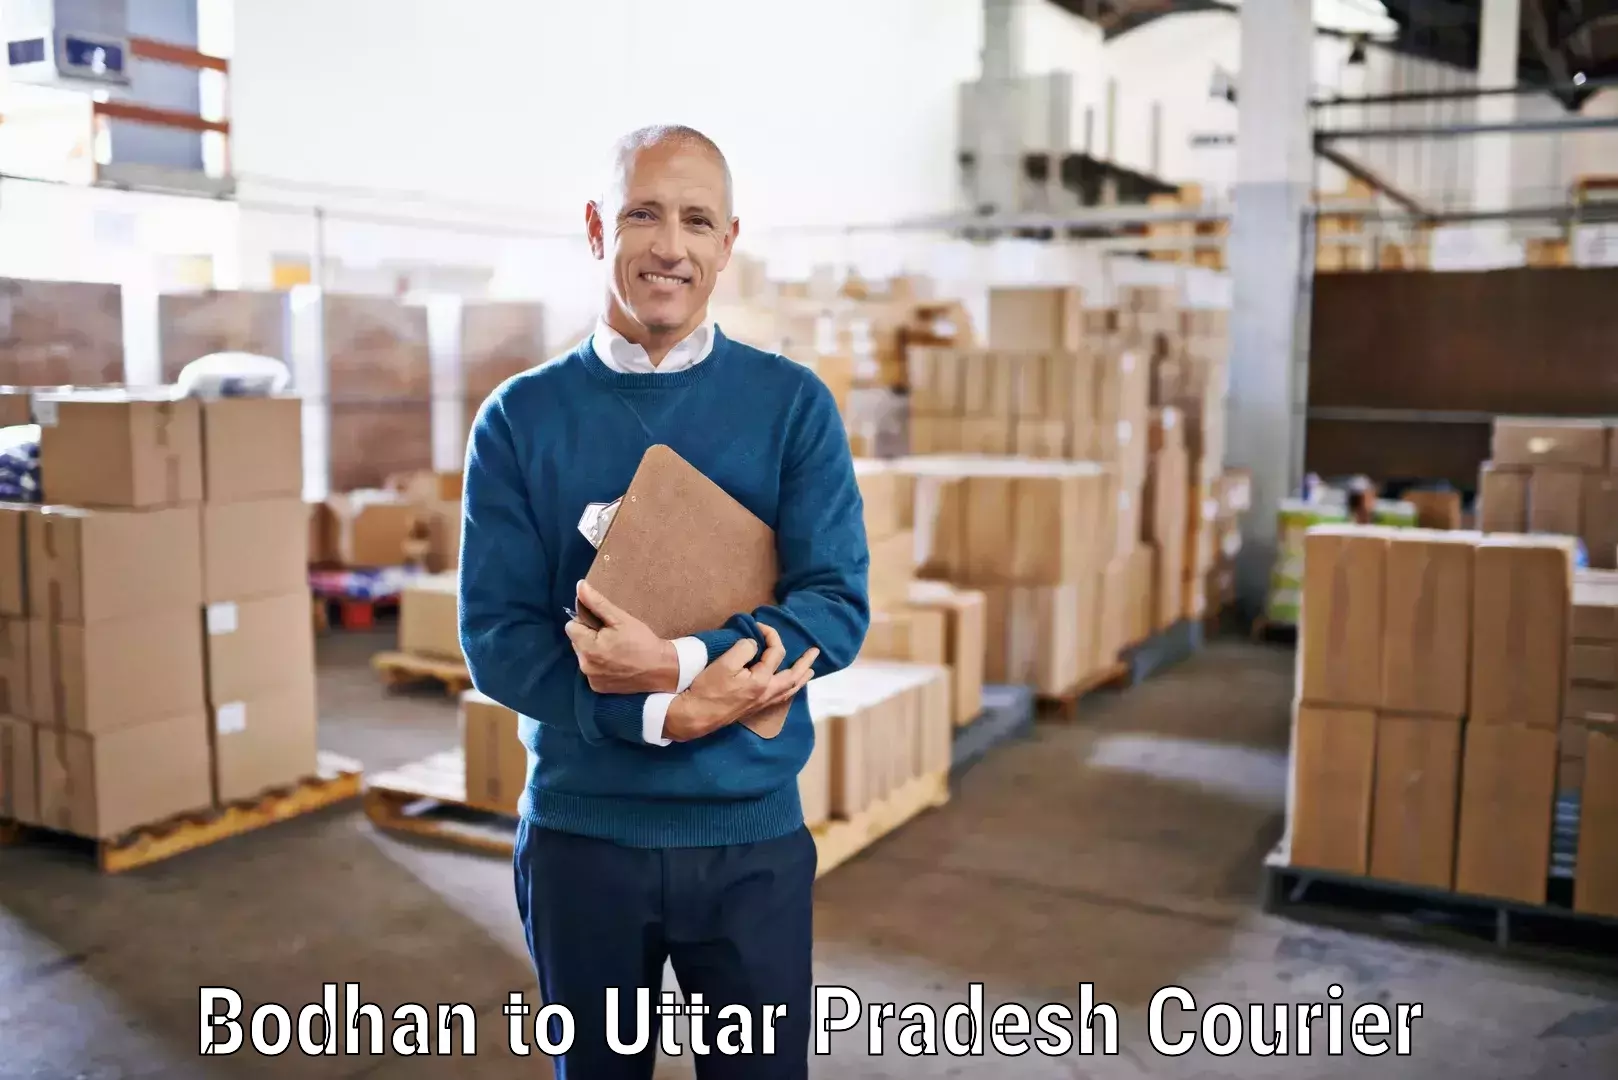 Flexible delivery schedules Bodhan to Gorakhpur